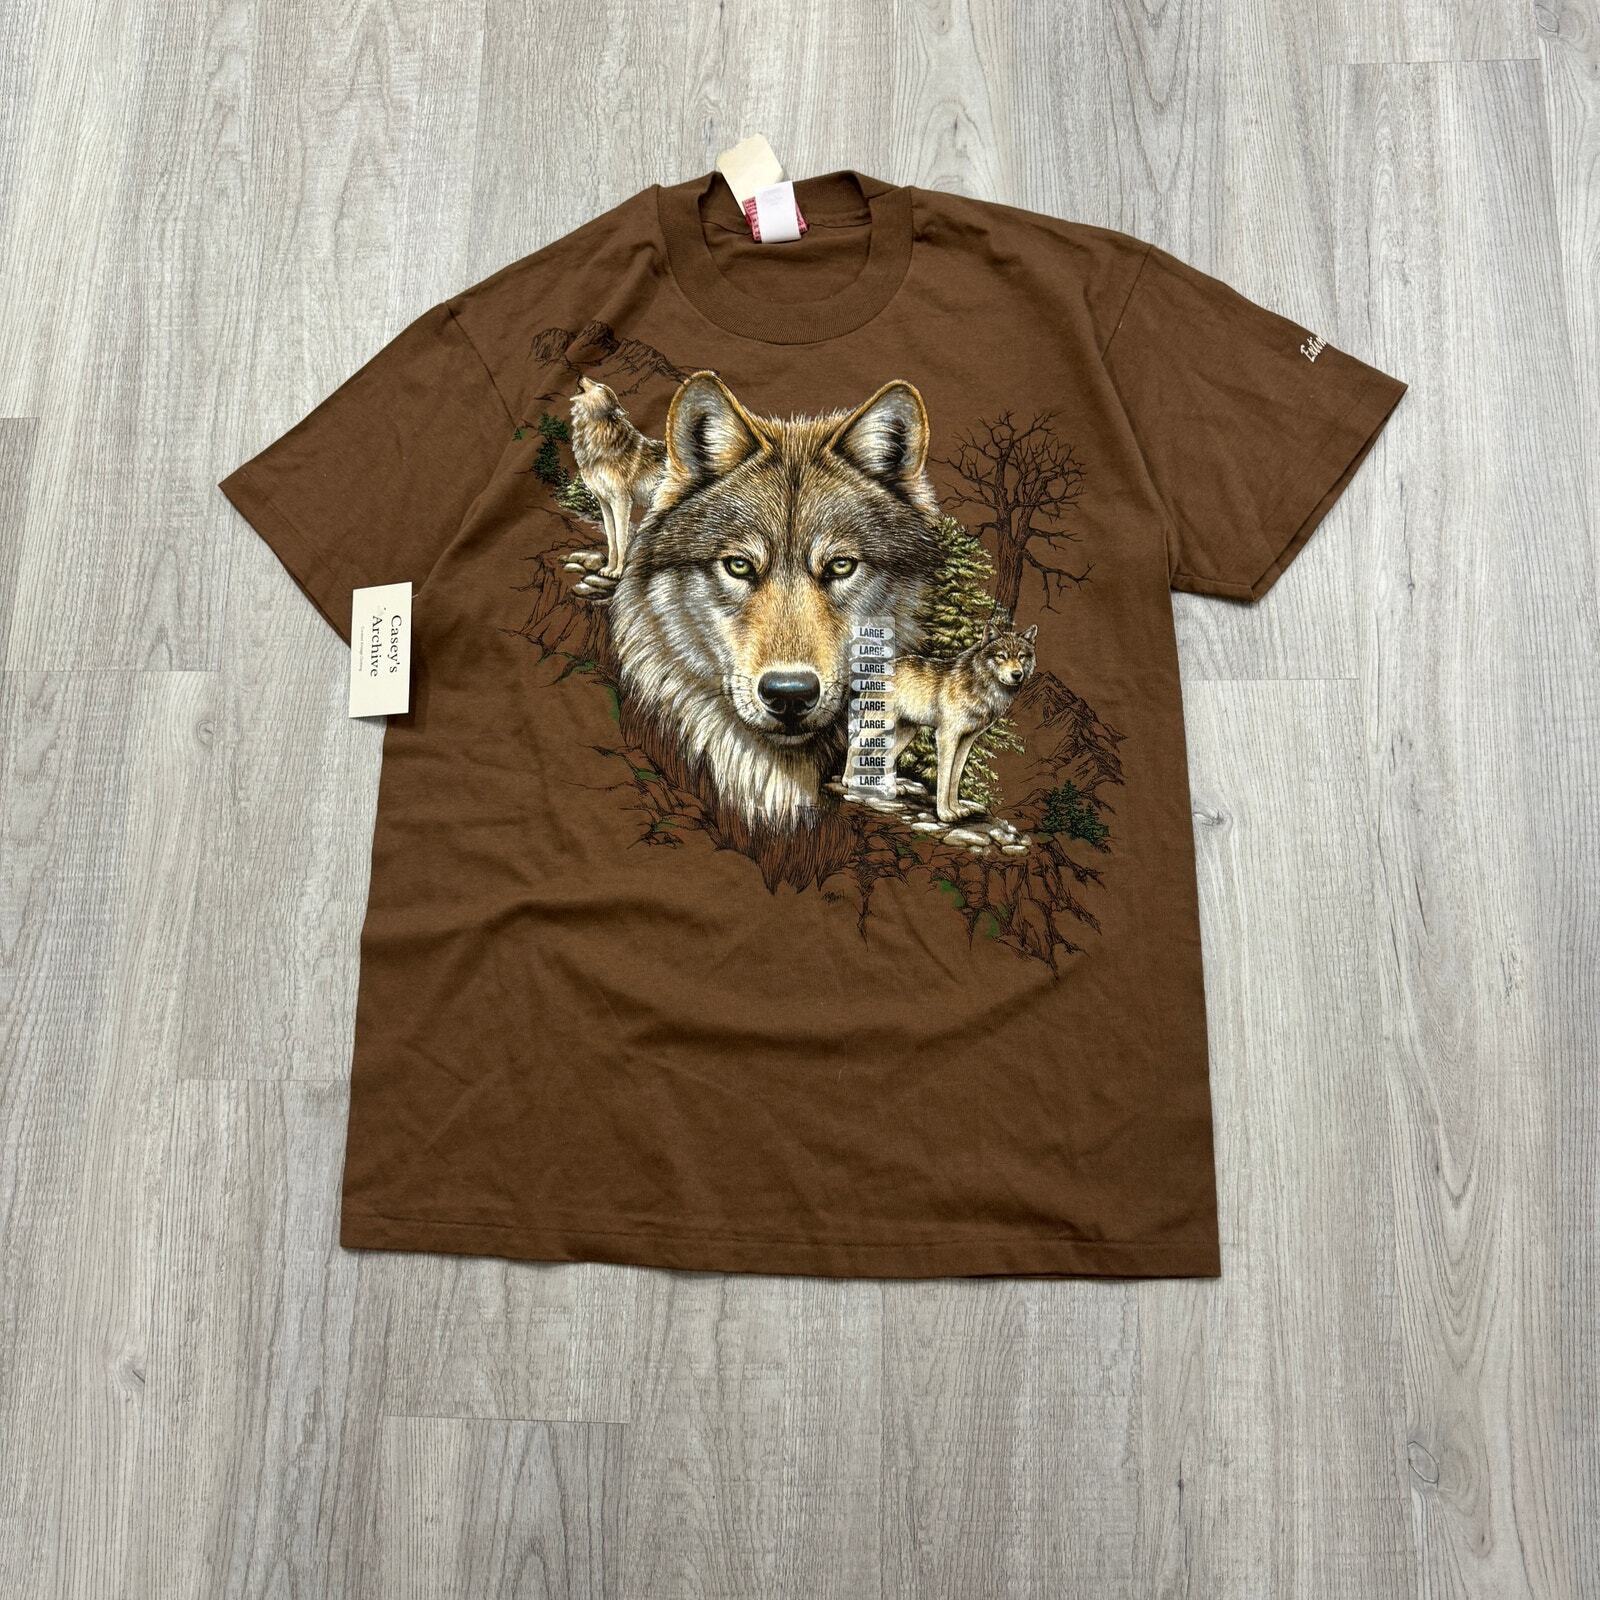 NWT VINTAGE 90s Wolf Face Animal Nature Single Stitch Shirt Size Large L 1990s